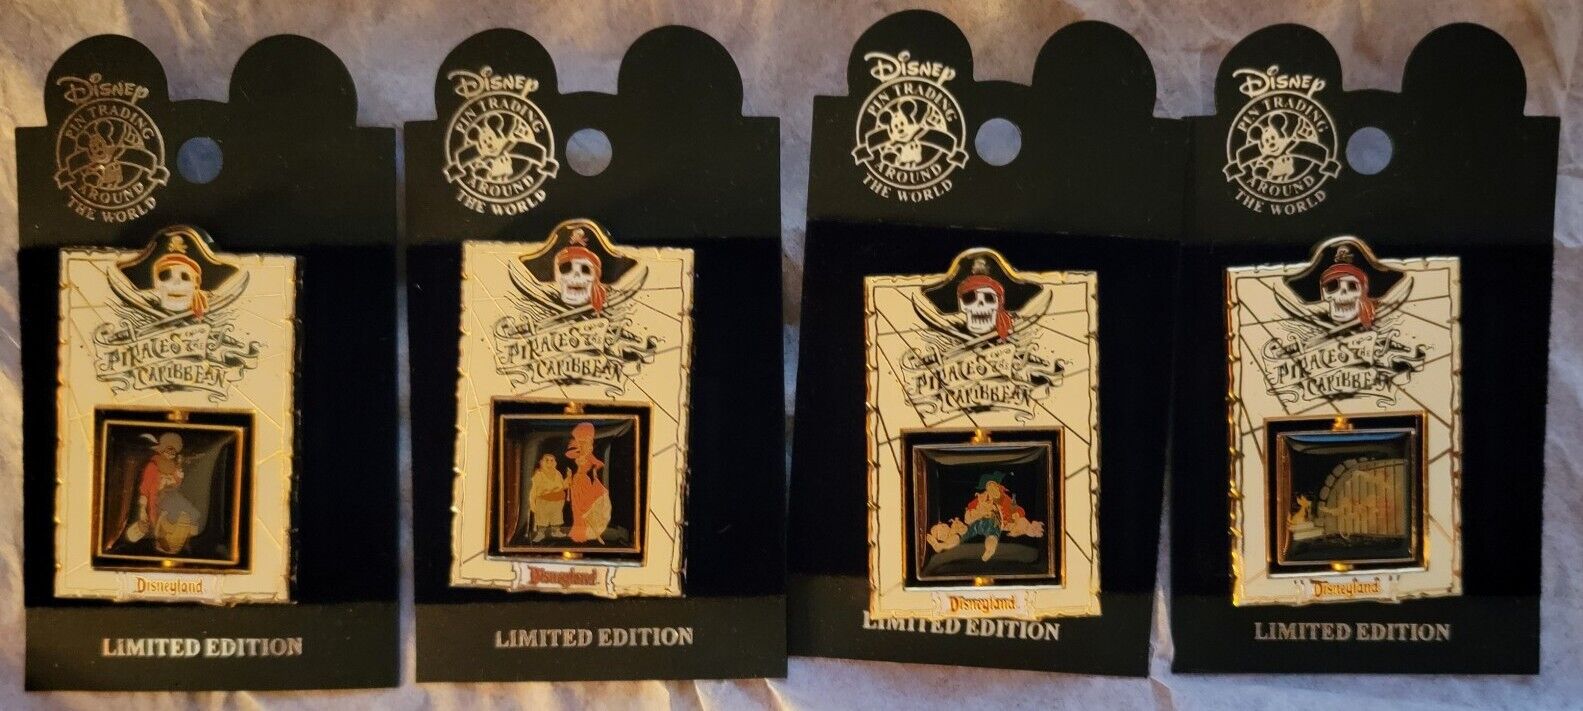 Pirates Of The Caribbean Spinner Pin Series - 4 Pins & 4 Scenes - LE 1500